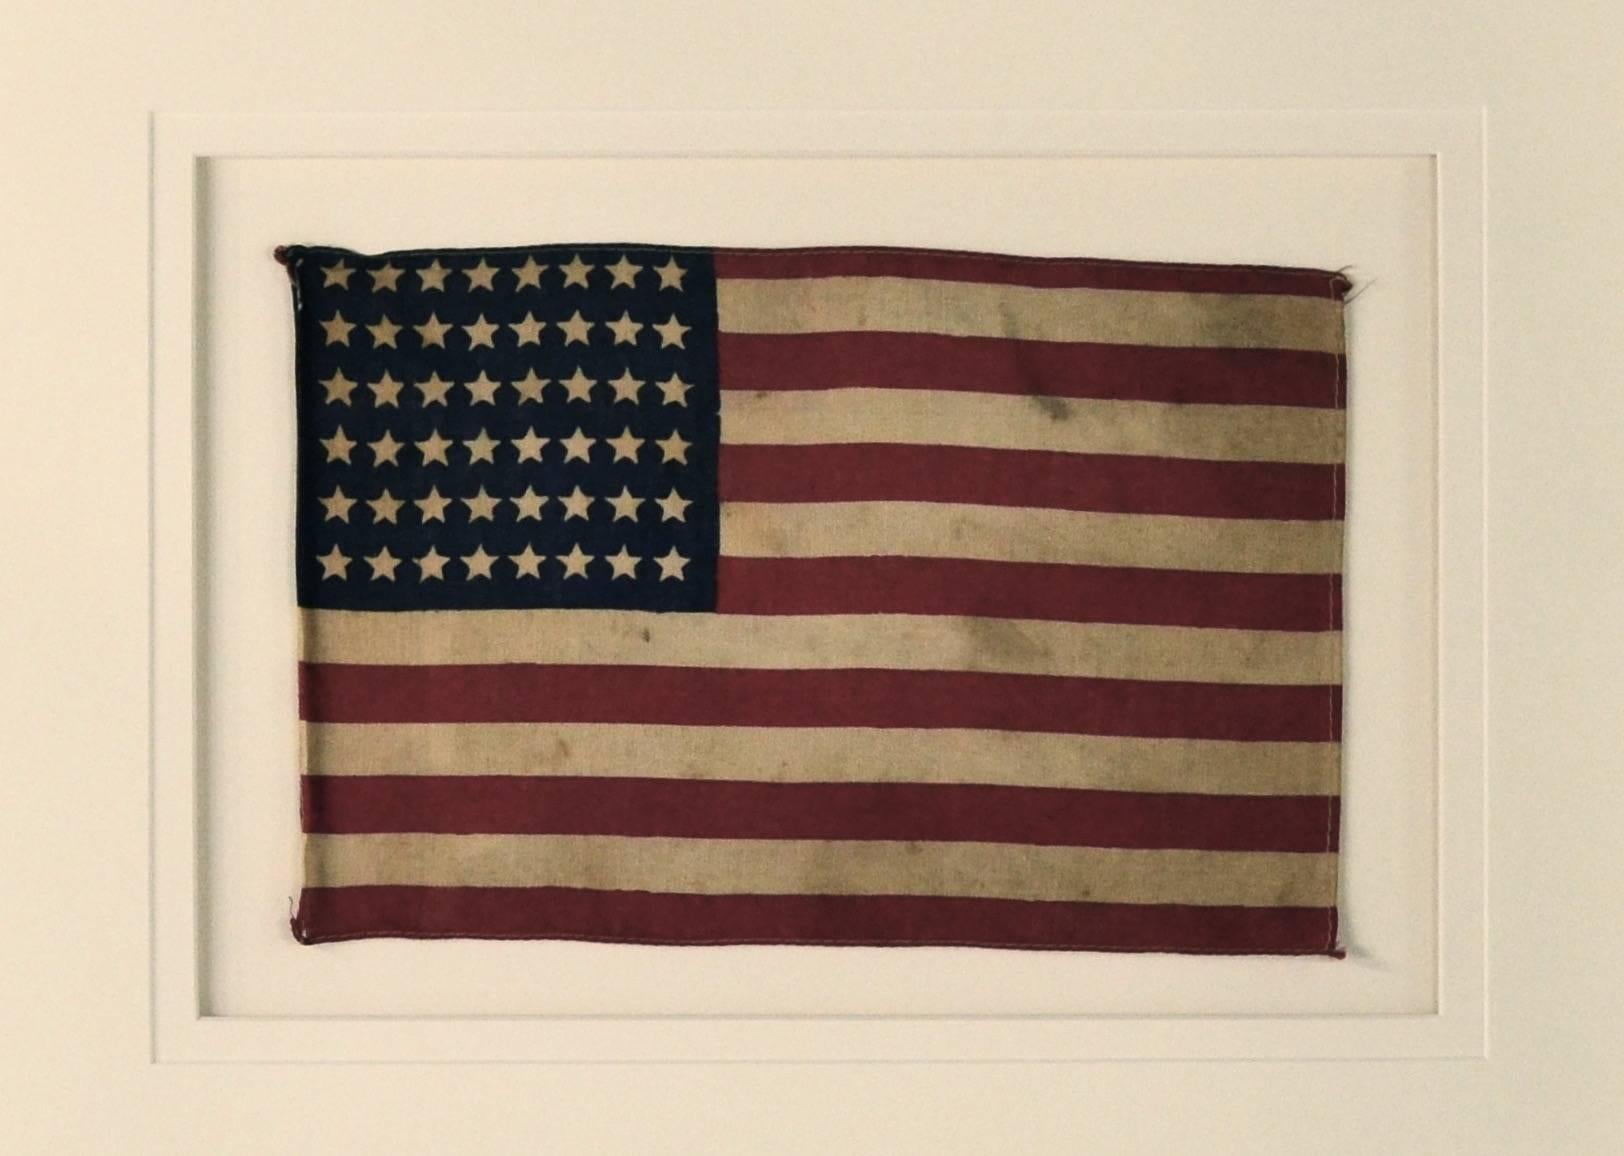 Authentic vintage 48 Star Flag made of printed cotton with sewn edges.
The 48 Star Flag was used from 1912-1959.
Conservation framing with UV acrylic.
 